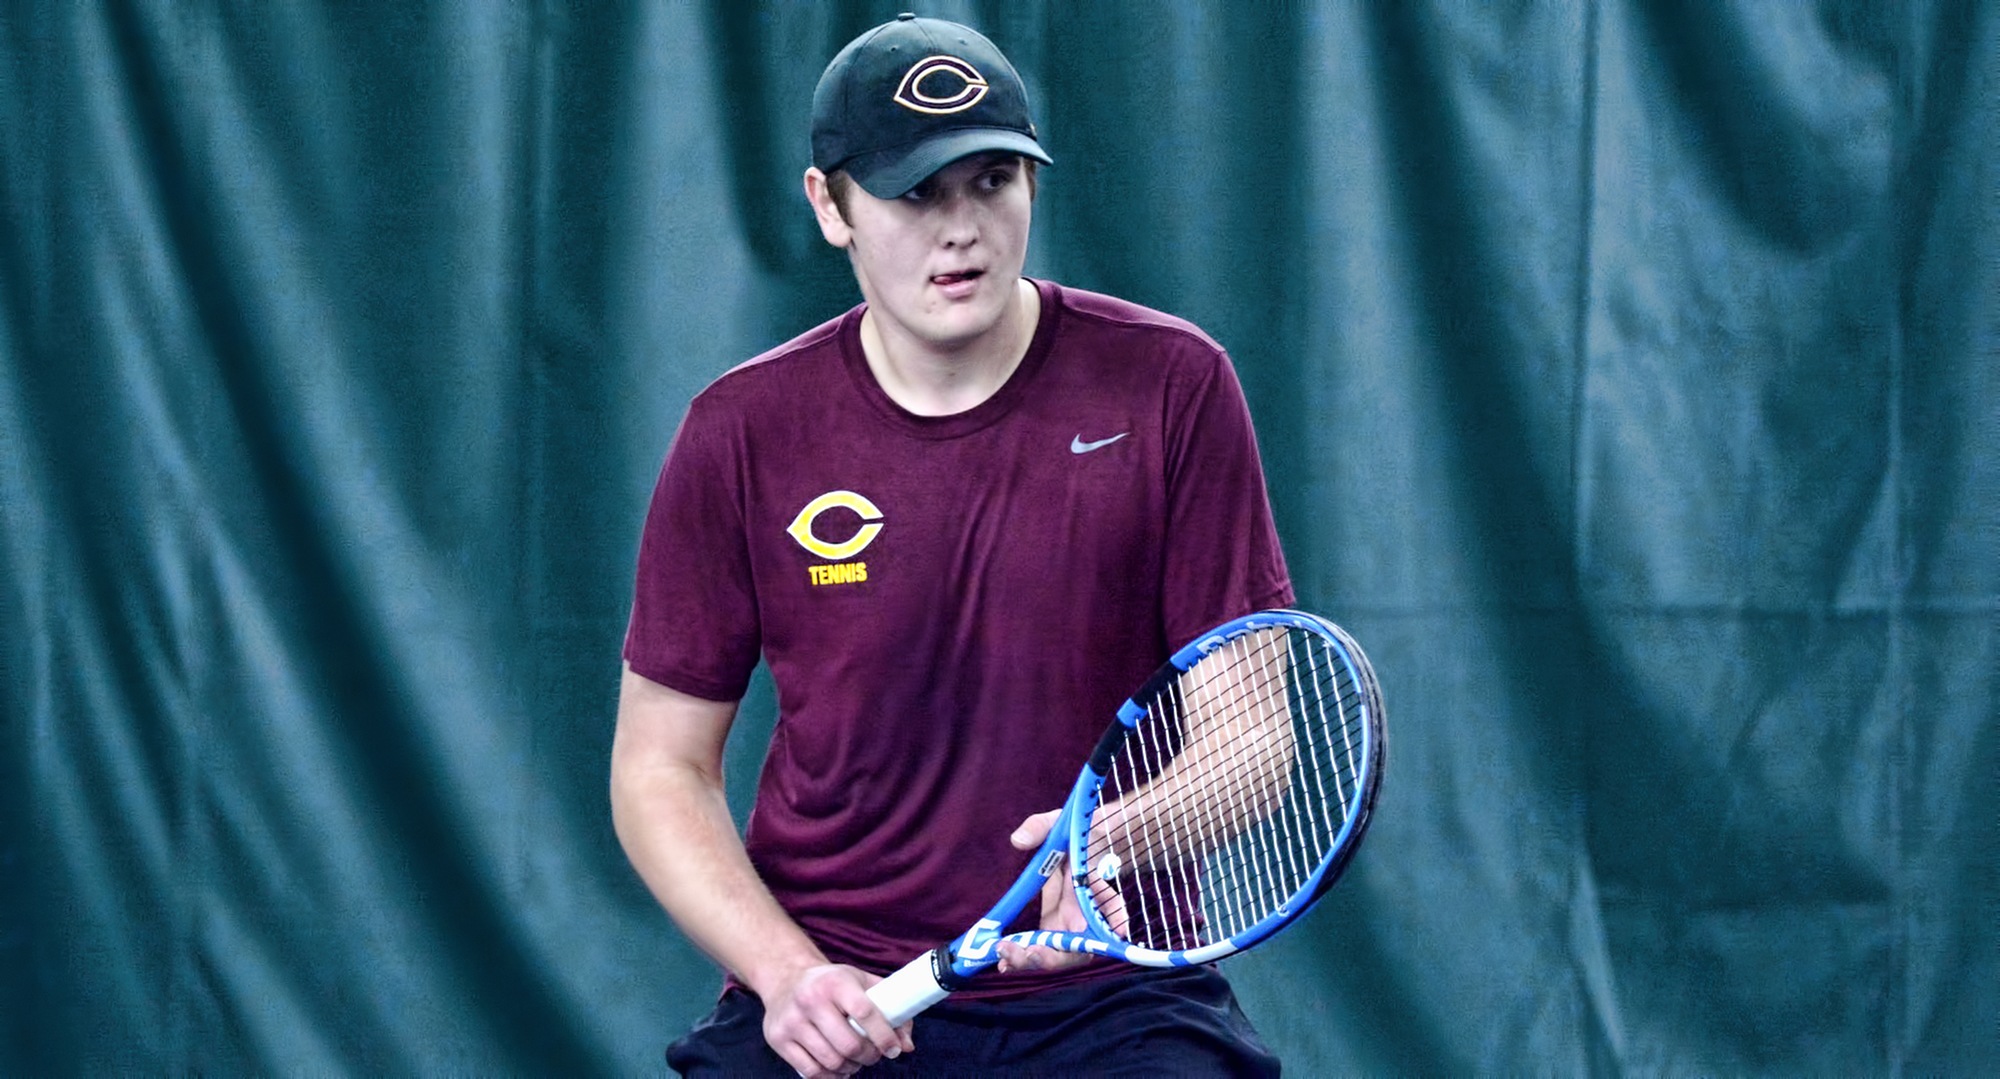 Freshman Ben Swanson gets ready to make a return during his singles win against Macalester. Swanson earned his career conference win vs. the Scots.